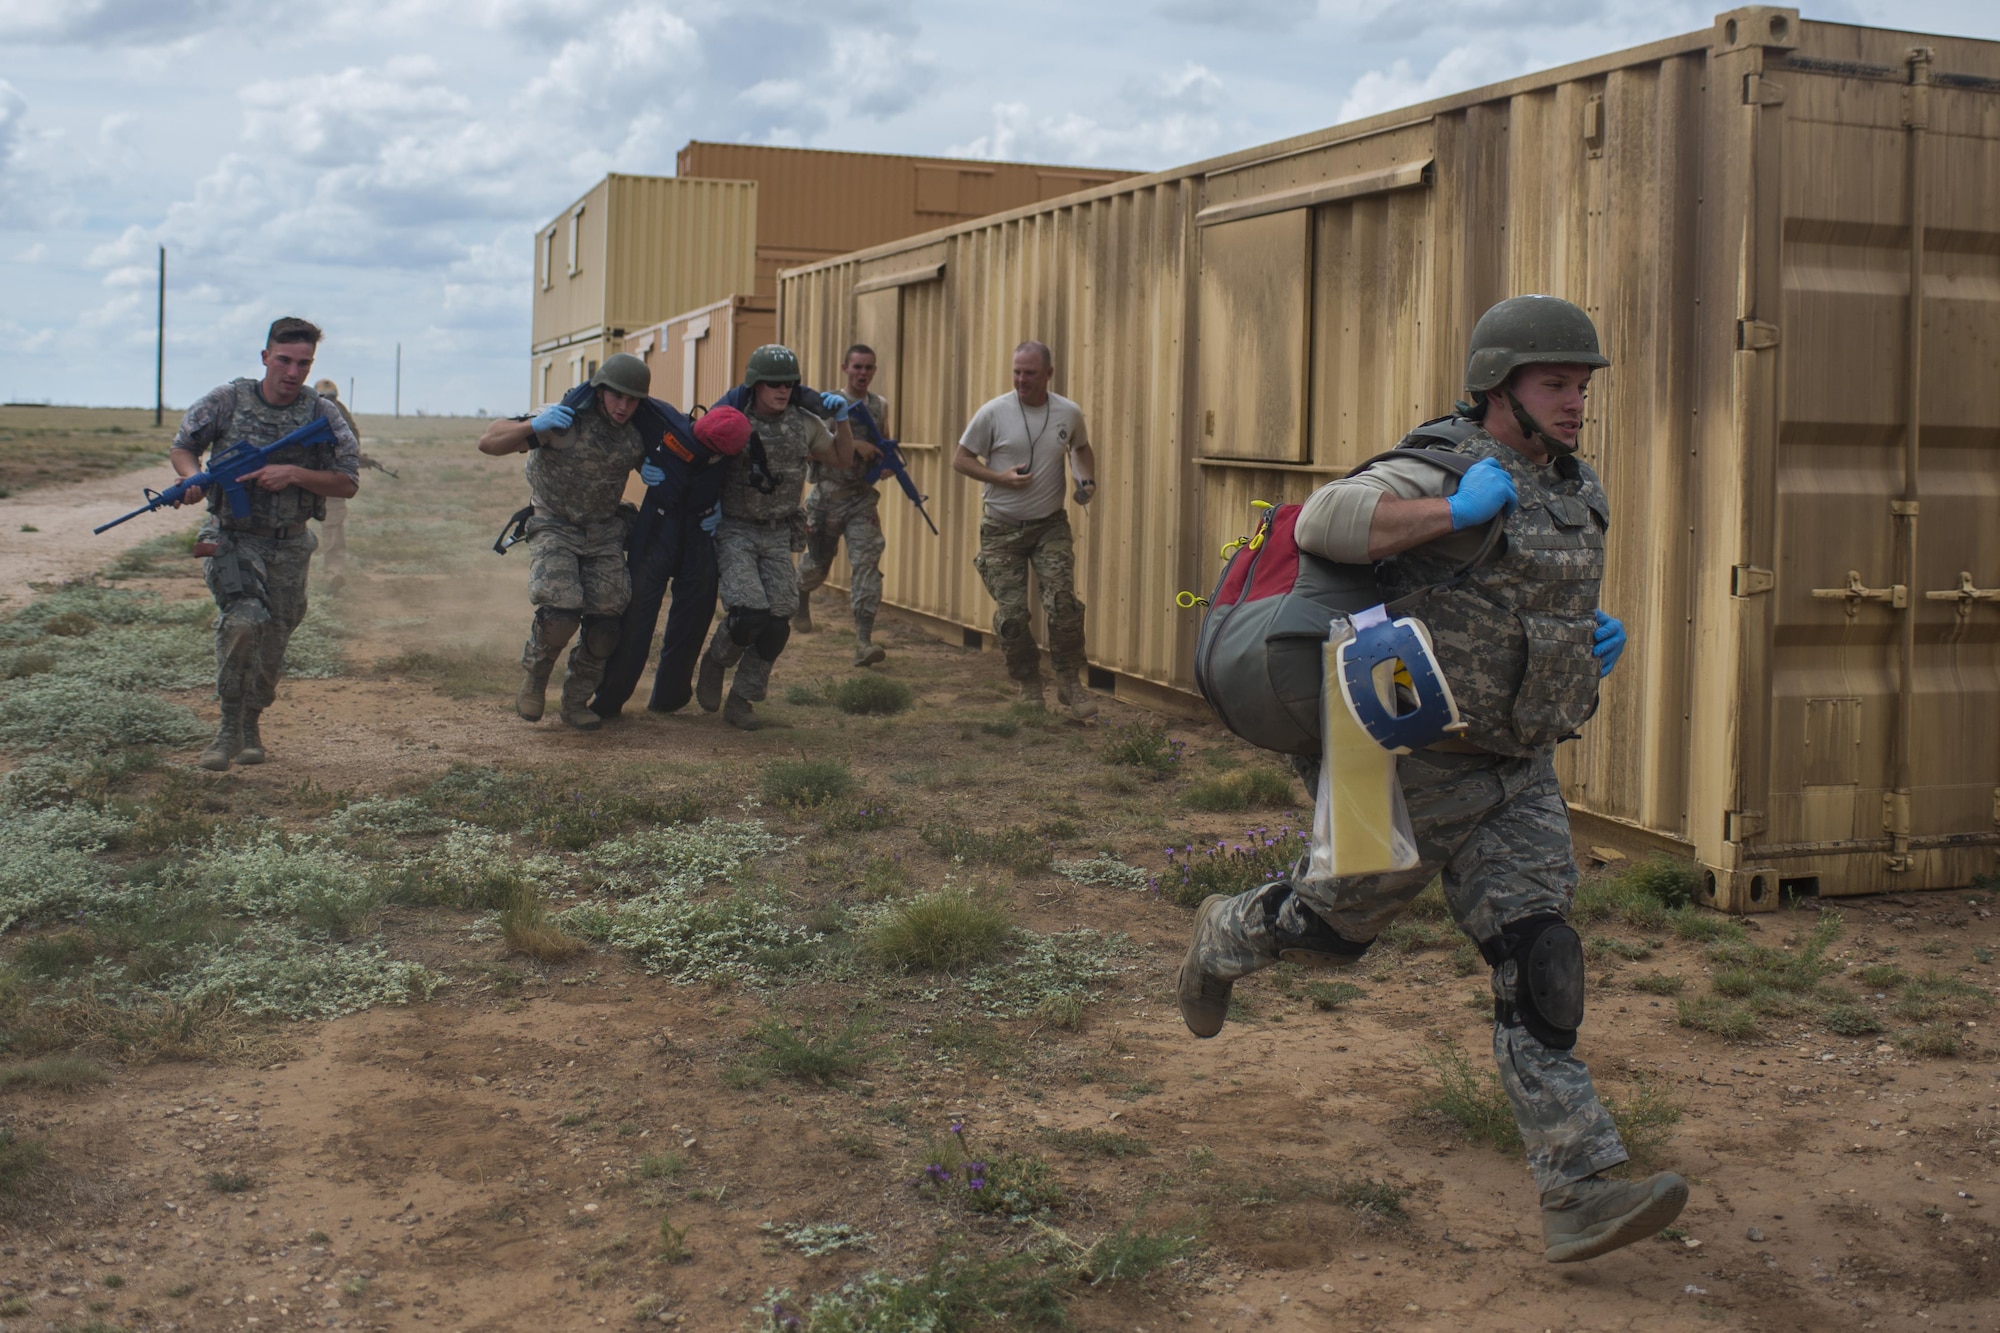 Emergency medical technicians, assigned to the 92nd Medical Group at Fairchild Air Force Base, Wash., carry a simulated patient for the Commando Challenge during the 2016 EMT Rodeo at Melrose Air Force Range, N.M., Aug. 25, 2016. Cannon’s EMT Rodeo tests the skills of medical professionals from across the Air Force through a series of innovative, high-pressure scenarios. (U.S. Air Force photo by Senior Airman Luke Kitterman/Released)